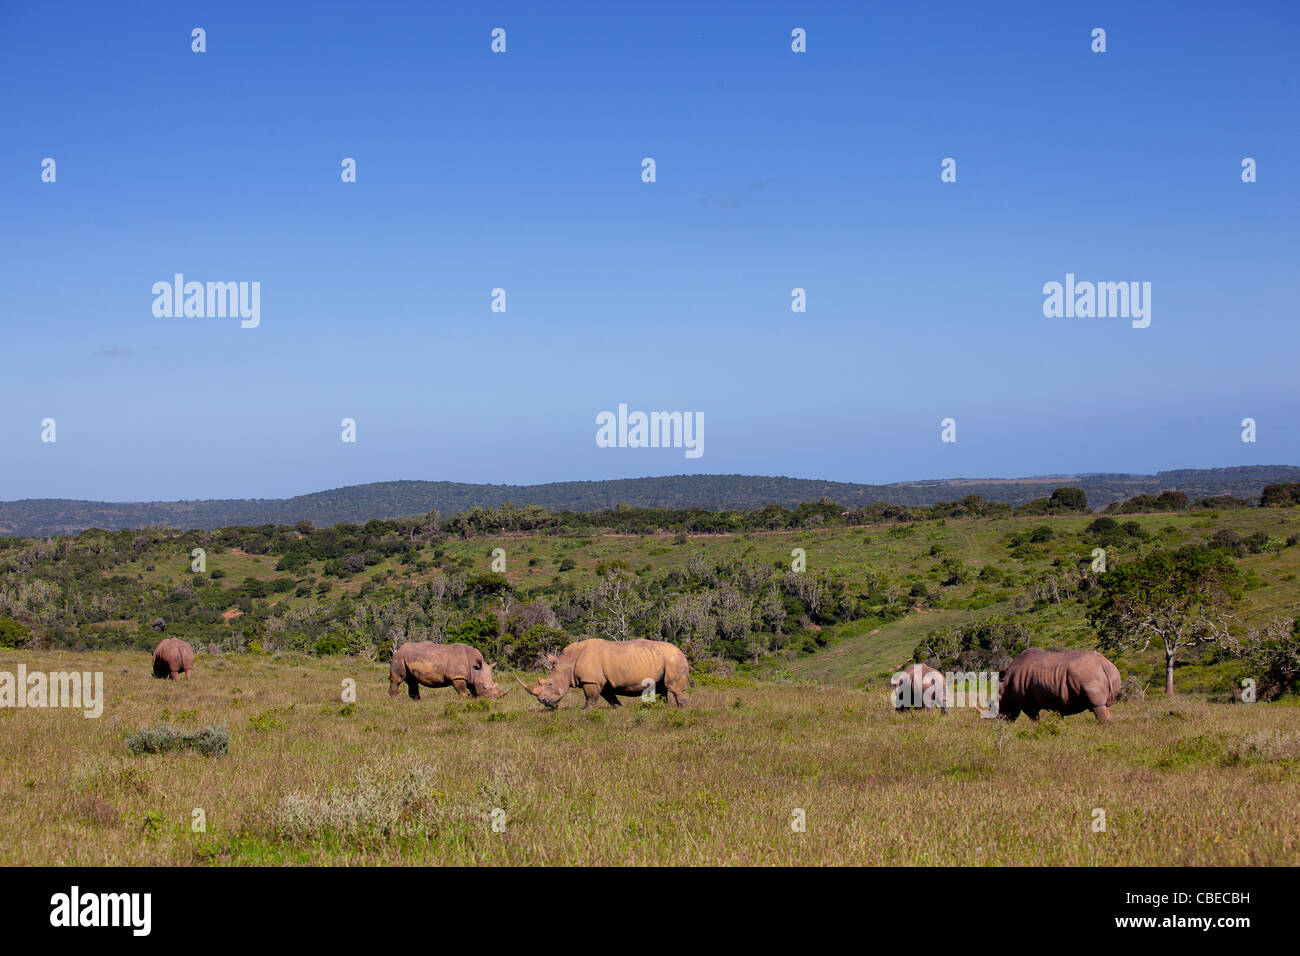 A herd of White Rhinoceros or Square-lipped rhinoceros (Ceratotherium simum) captured in Kariega Game Reserve, South Africa Stock Photo